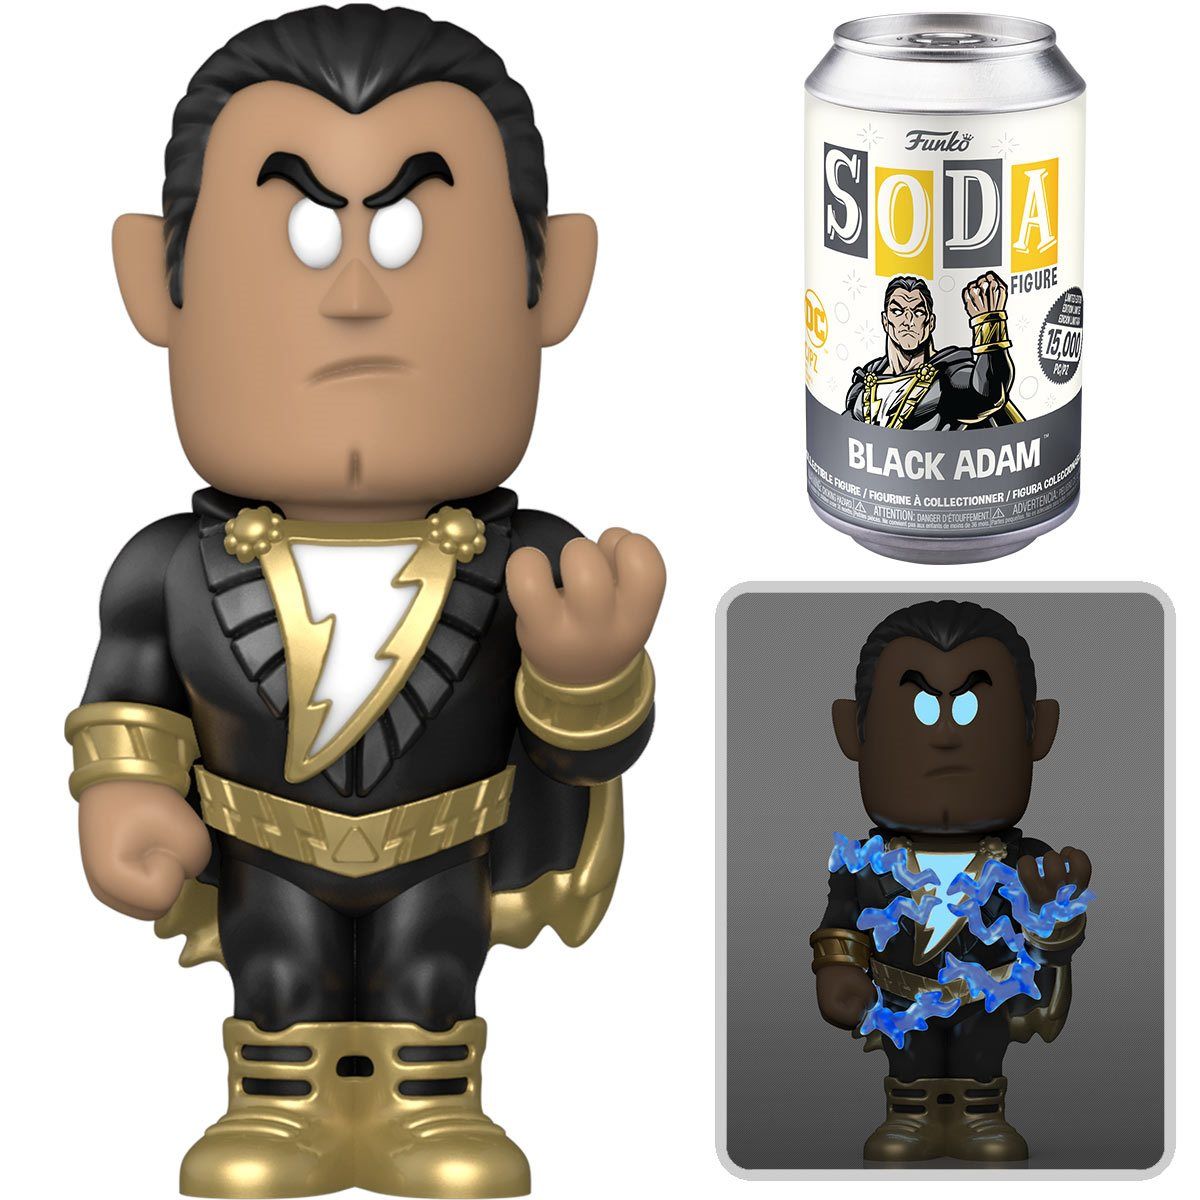 New Characters Joining Funko's Soda Pop Line